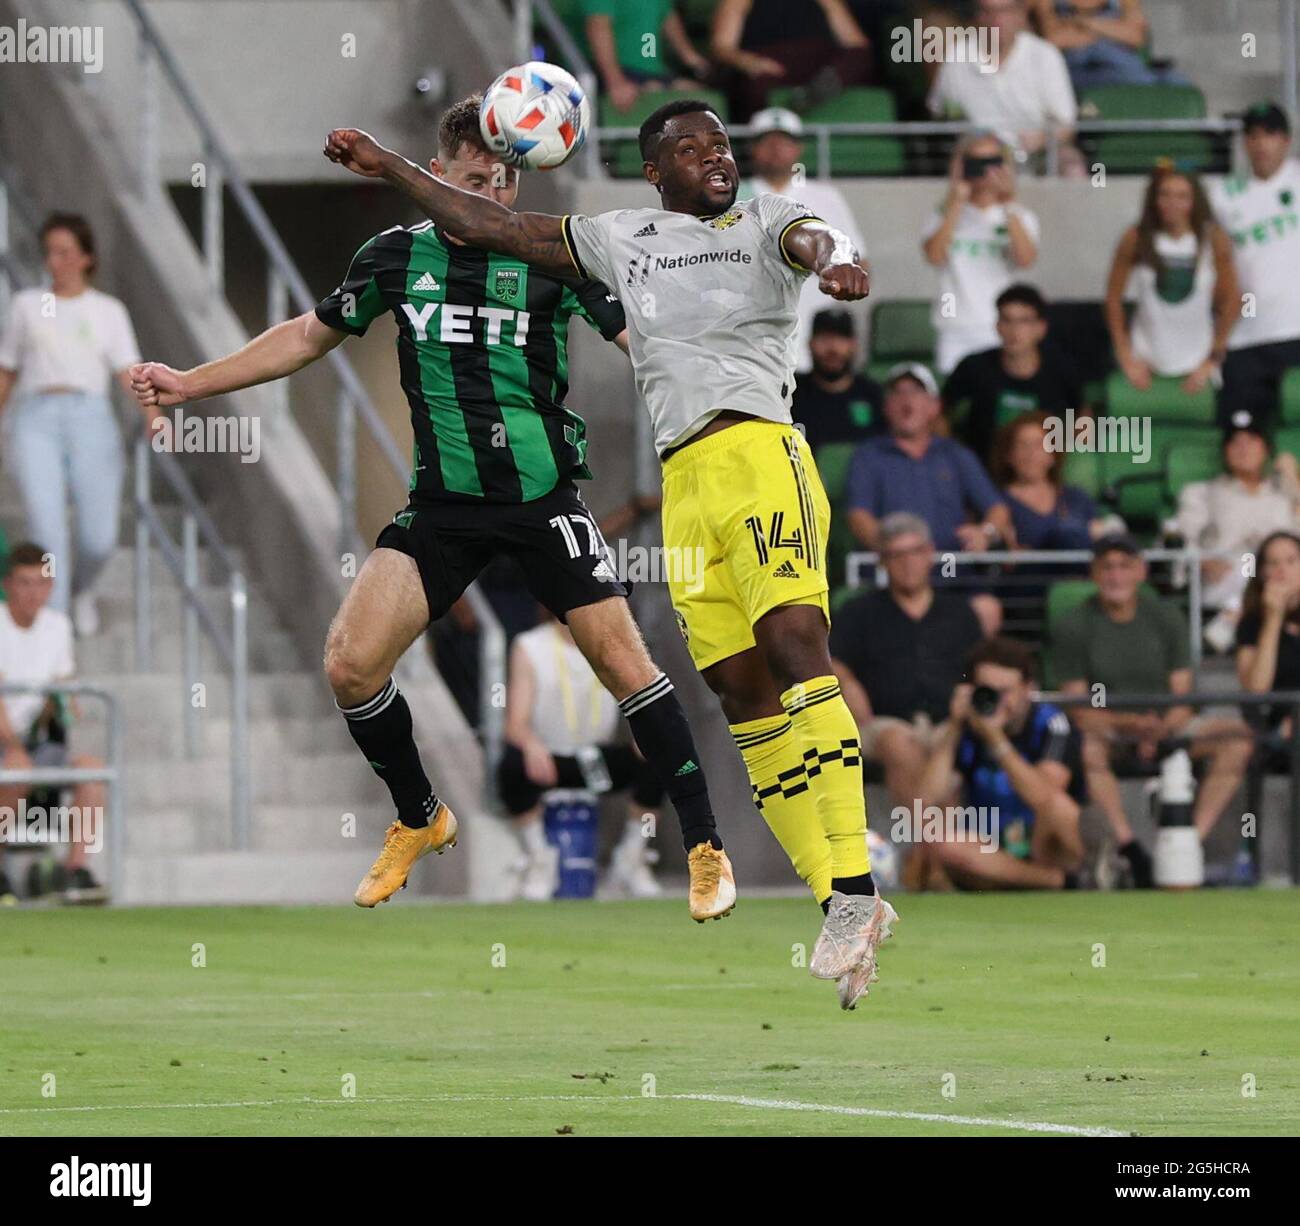 Austin, Texas, USA. 27th June, 2021. Columbus Crew defender Waylon Francis (14) heads the ball away to deflect a pass to Austin FC forward Jon Gallagher (17) during the second half of a Major League Soccer match between Austin FC and the Columbus Crew on June 27, 2021 in Austin, Texas. The teams played to a 0-0 draw. Credit: Scott Coleman/ZUMA Wire/Alamy Live News Stock Photo